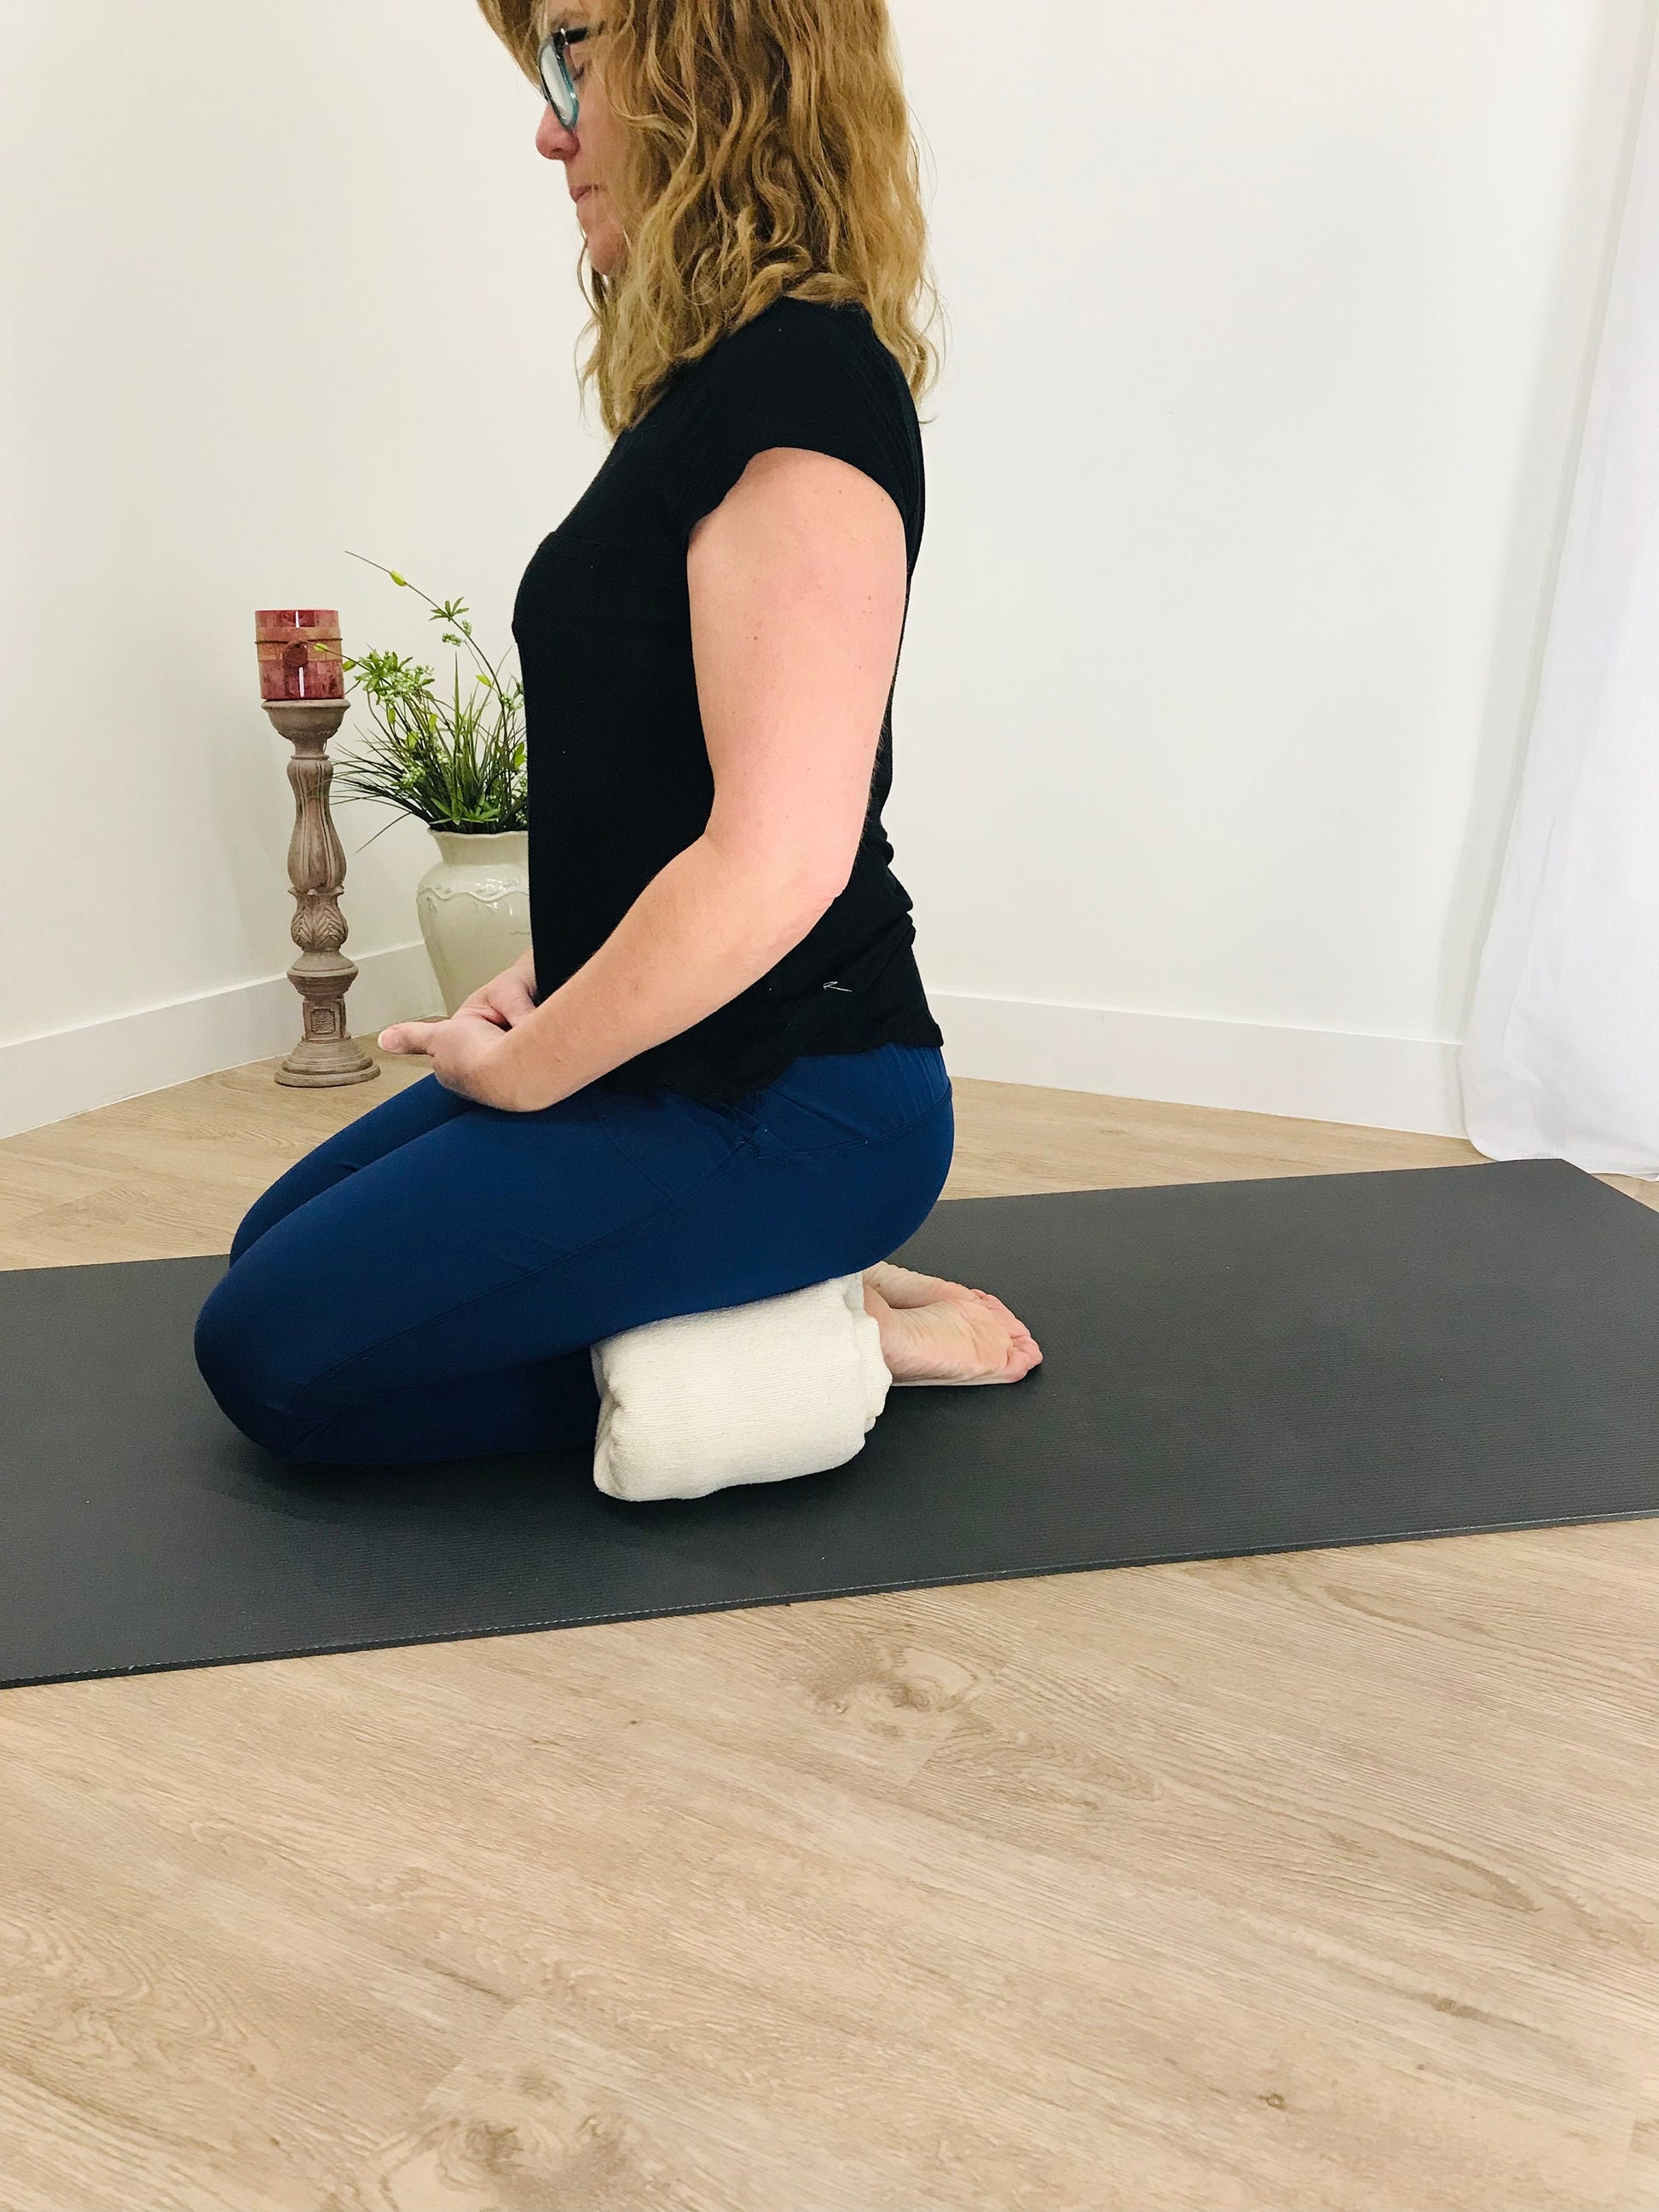 Understanding Props - How to Use the Yoga Blanket - Blog - Yogamatters